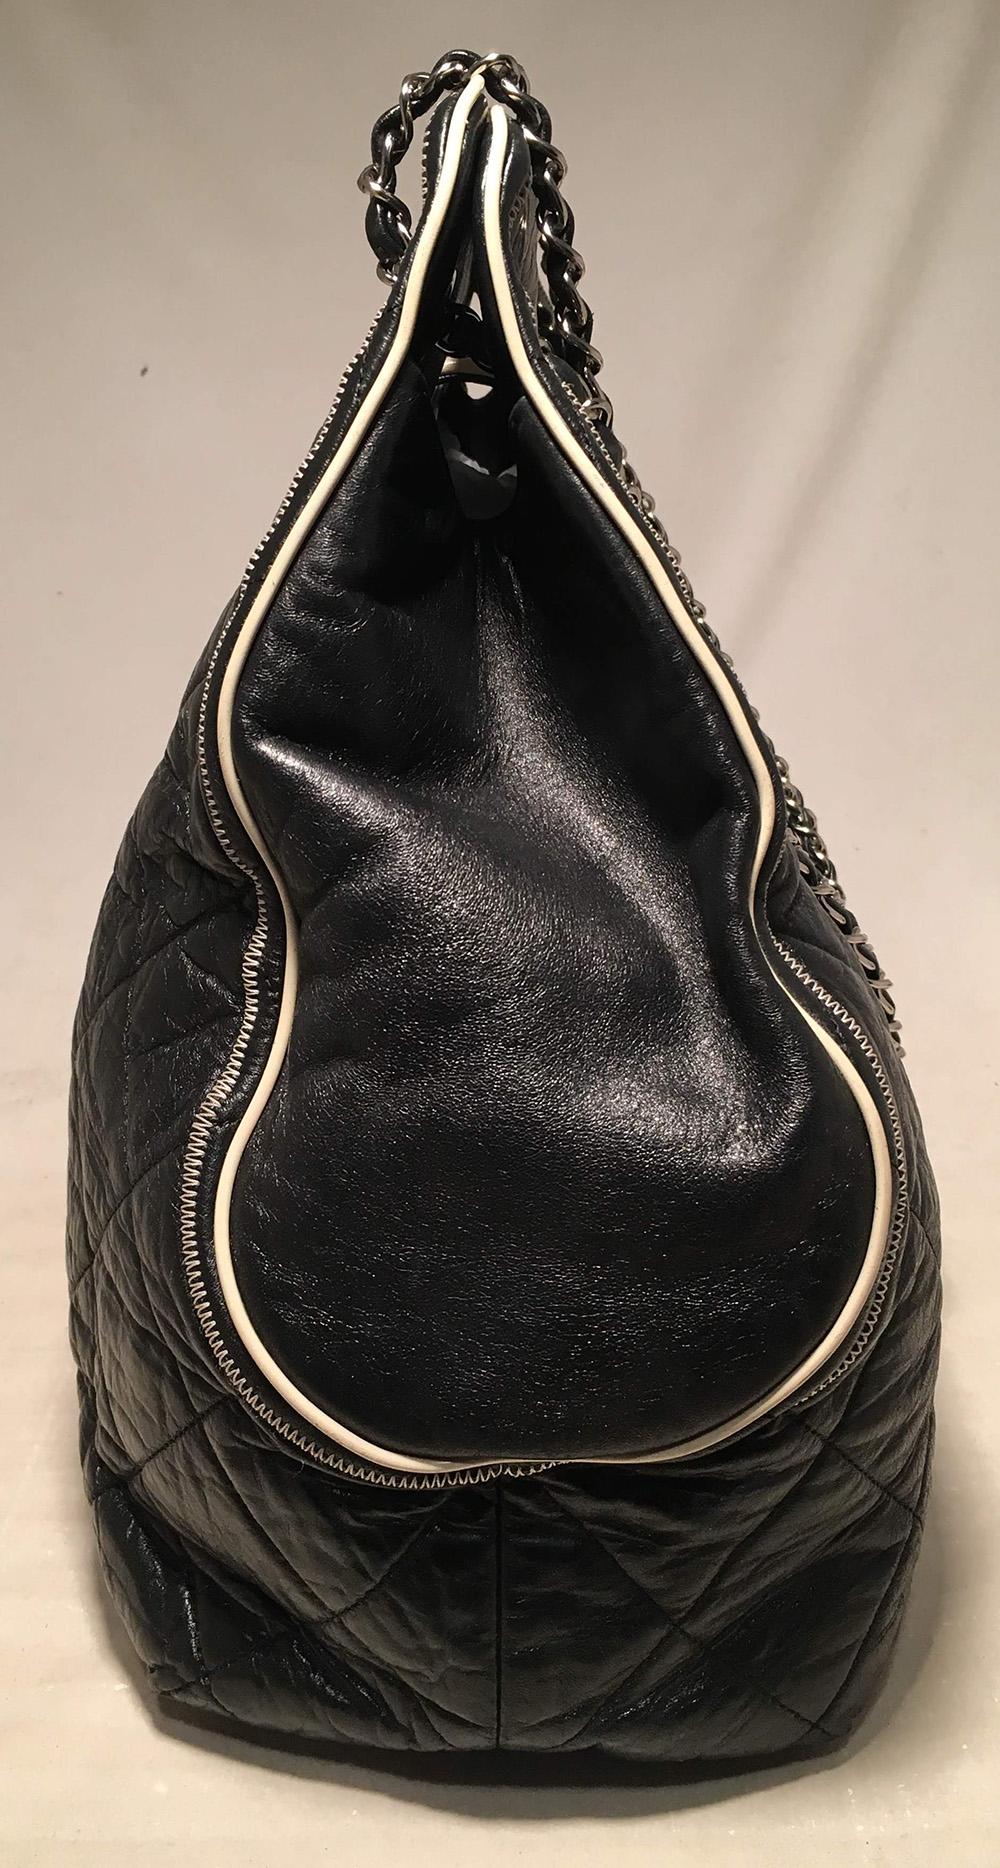 Chanel Black East West Mademoiselle Cut Out Handle Tote in excellent condition. Quilted black leather exterior trimmed with cream leather piping, silver hardware, and signature woven chain and leather shoulder strap. Large mademoiselle style twist